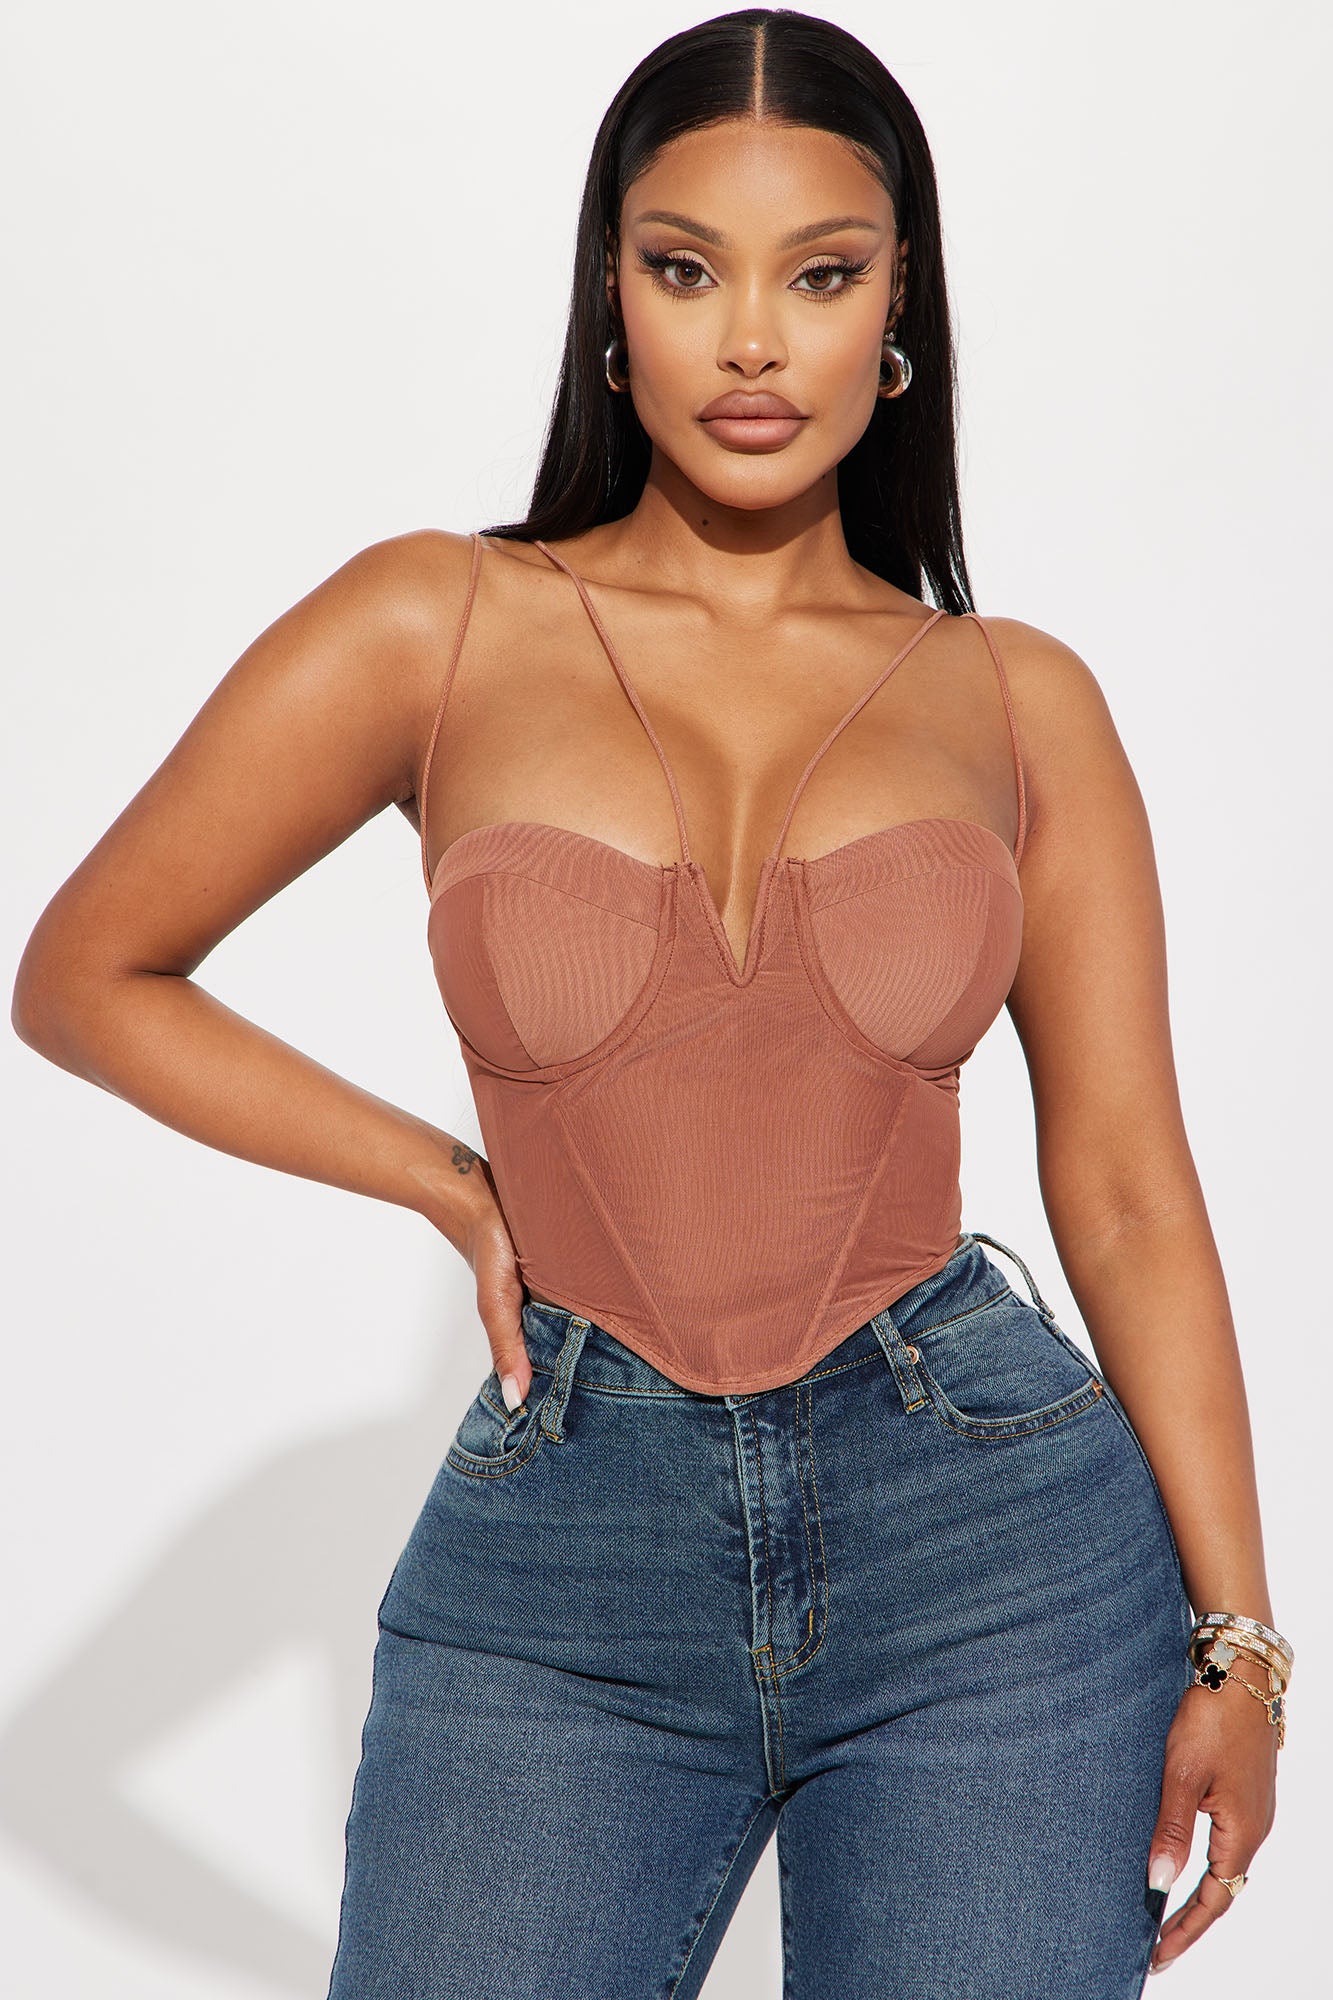 Flattering Mocha Bustier - Sizes up to 36H